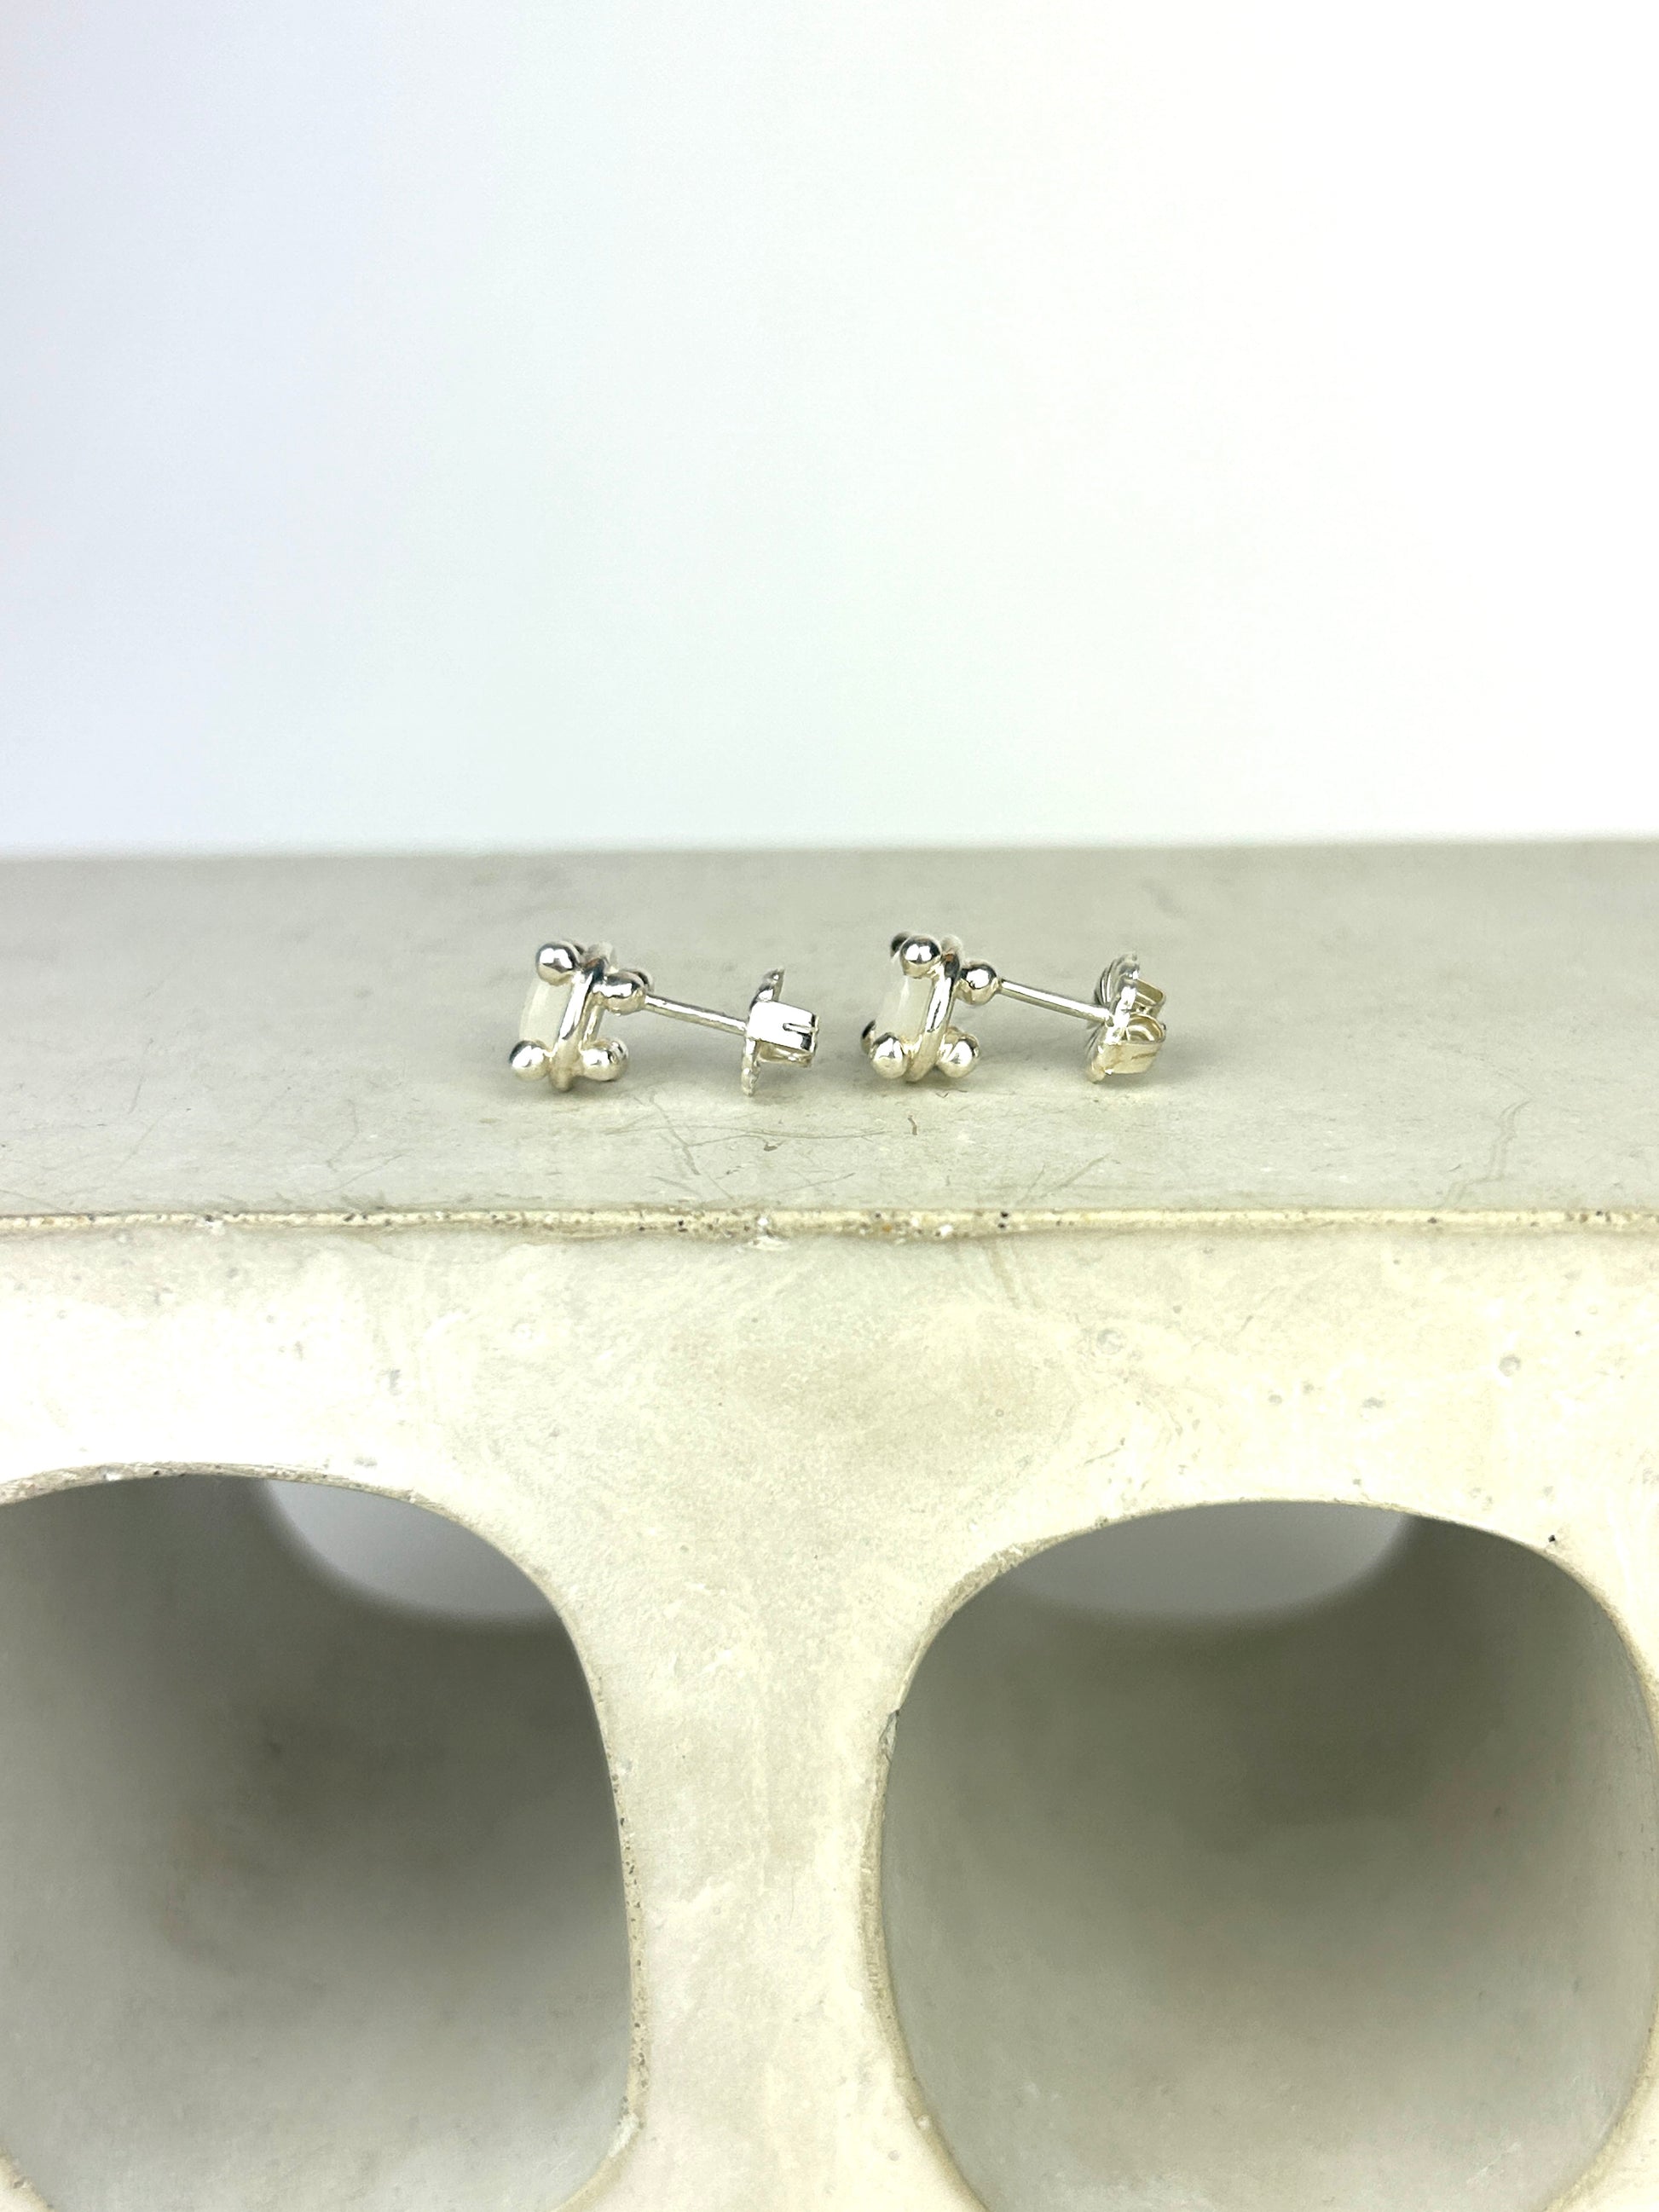 Side view of sterling silver earrings with balls for prongs, holding 6mm milky white moonstones. They are displayed laid on a small, smooth decotarive cinderblock infront of a white background.